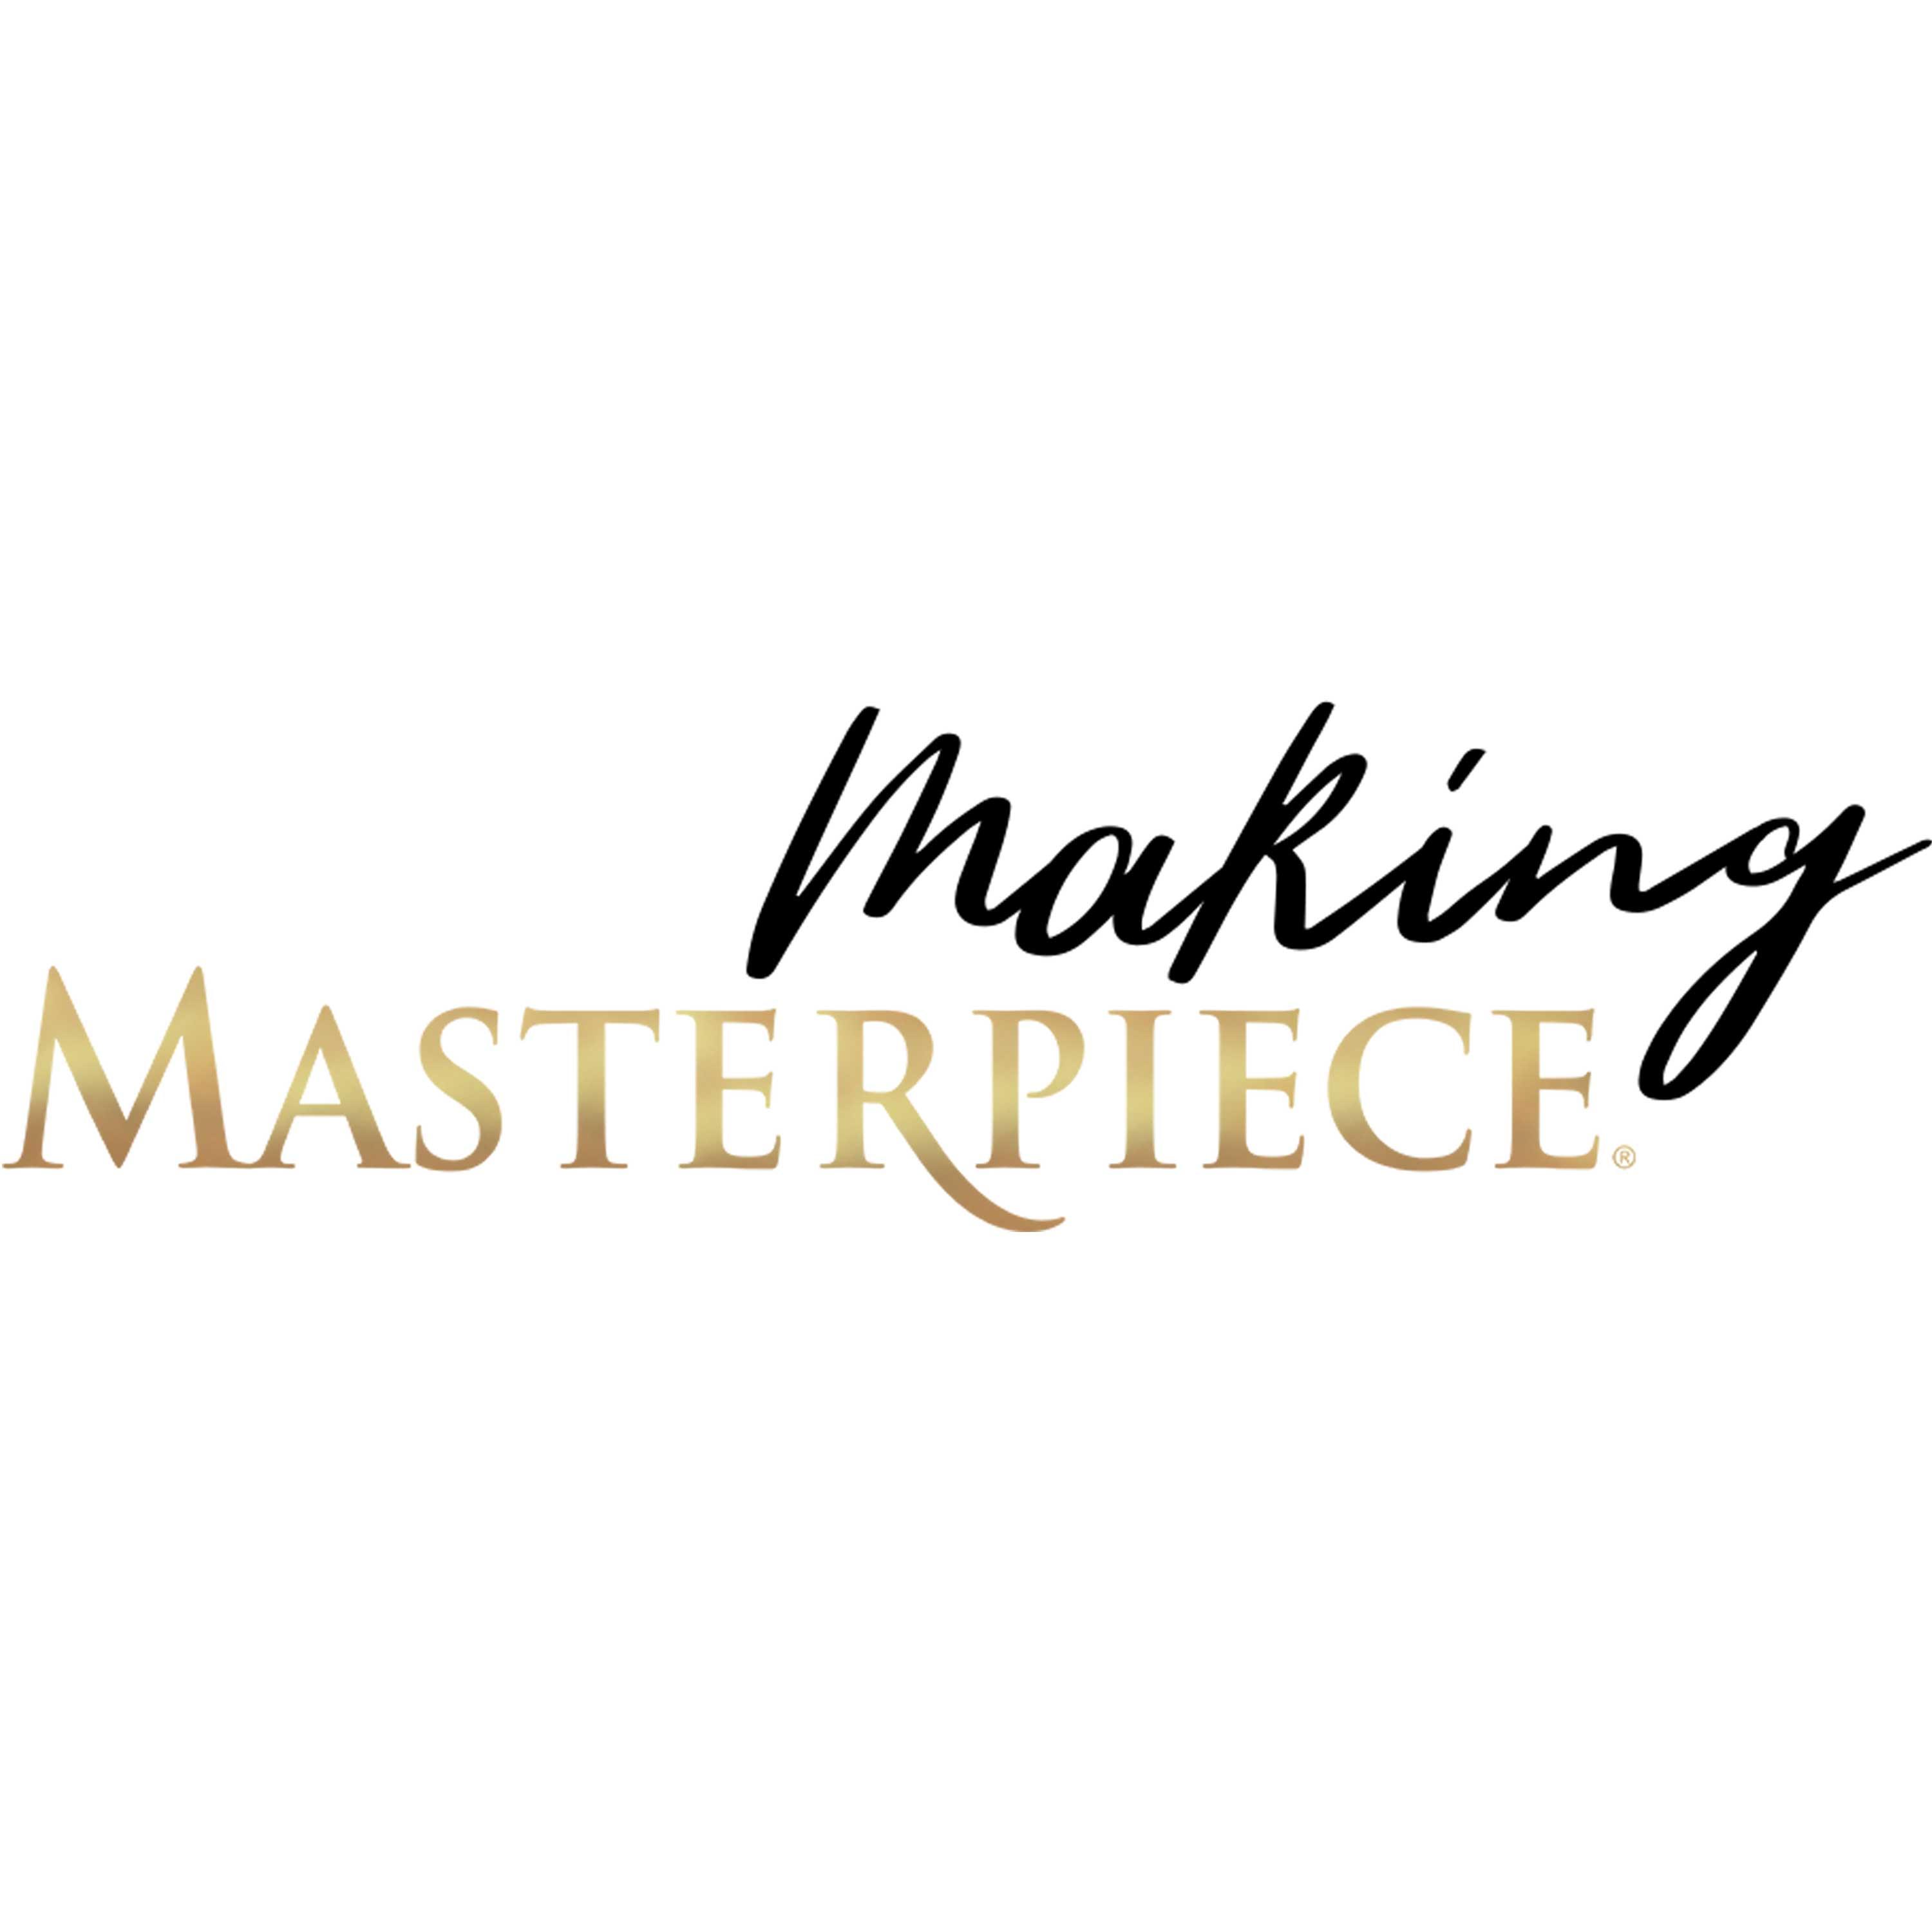 Thumbnail for "Making MASTERPIECE, Episode Three: The "Downton" Effect".